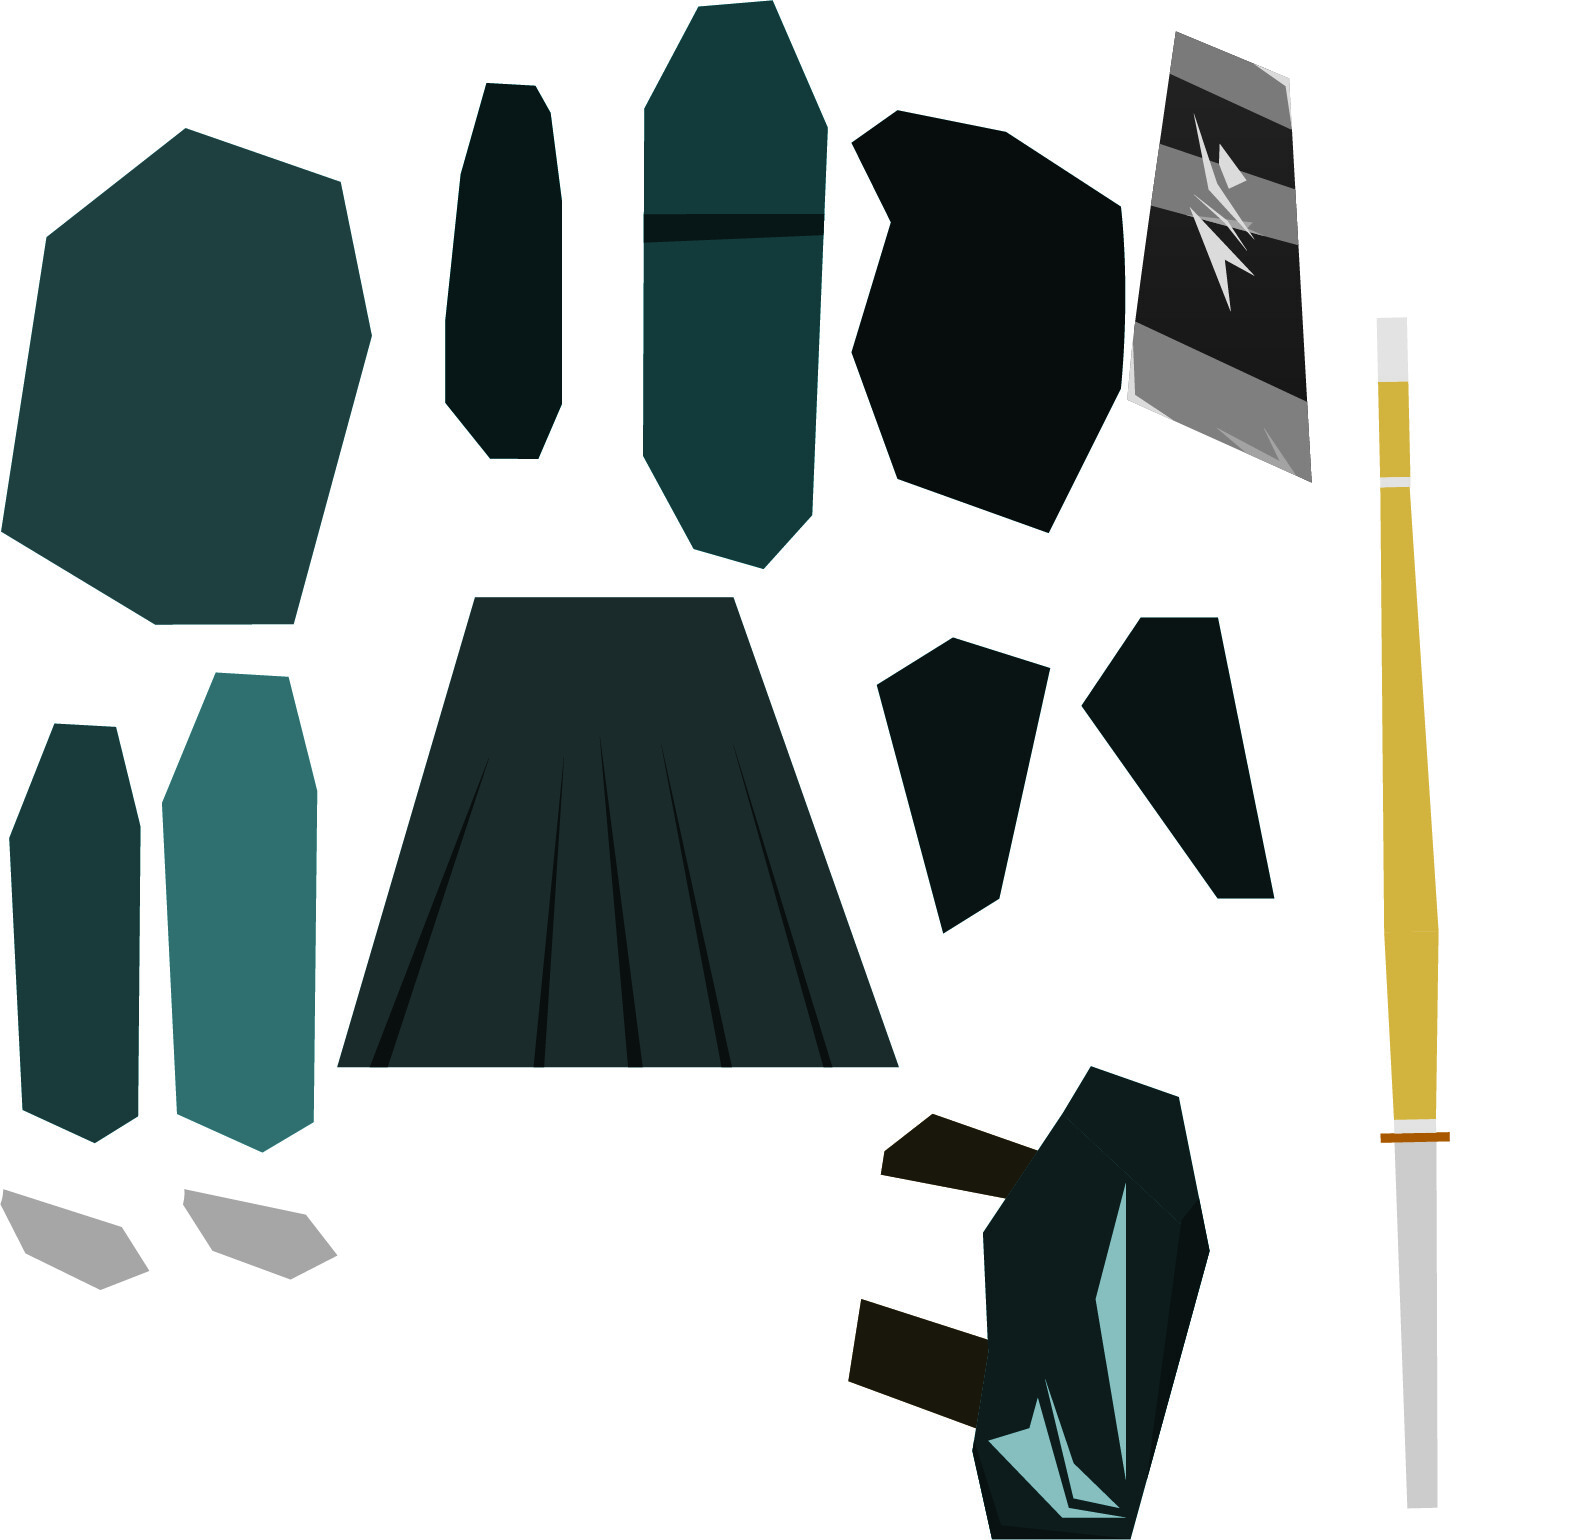 The parts I used that I made in illustrator. I thought to myself that the legs wouldn't be as relevant, mostly because they're going to be covered up by the "Skirt". I also made some feet, but, I found it looked more interesting if there weren't any.